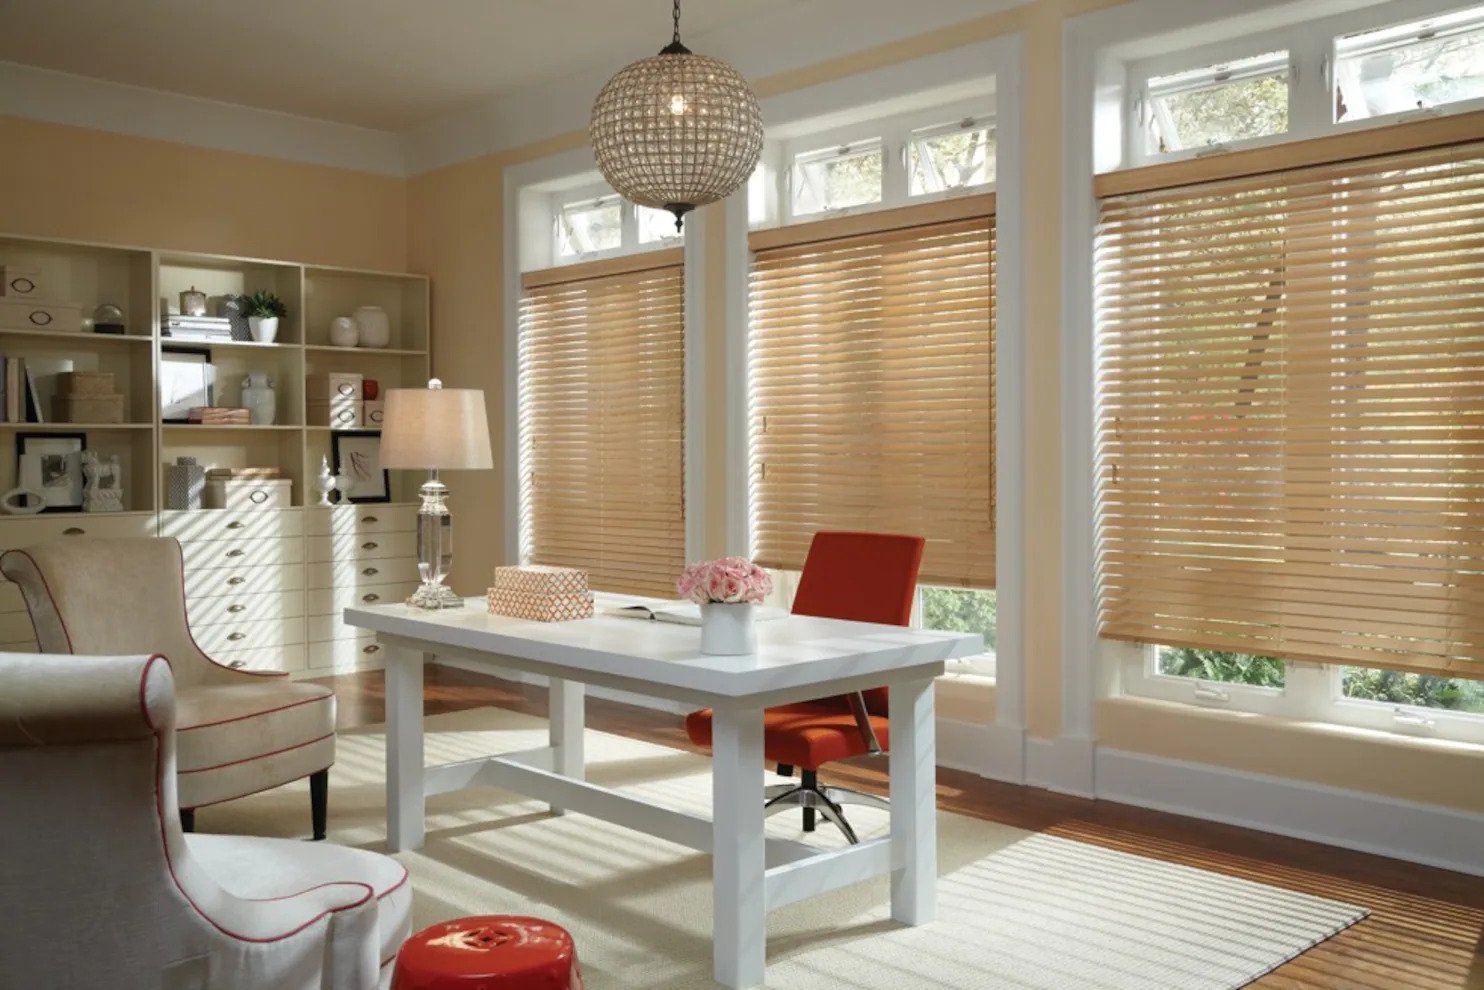 Beautify your space with national blinds